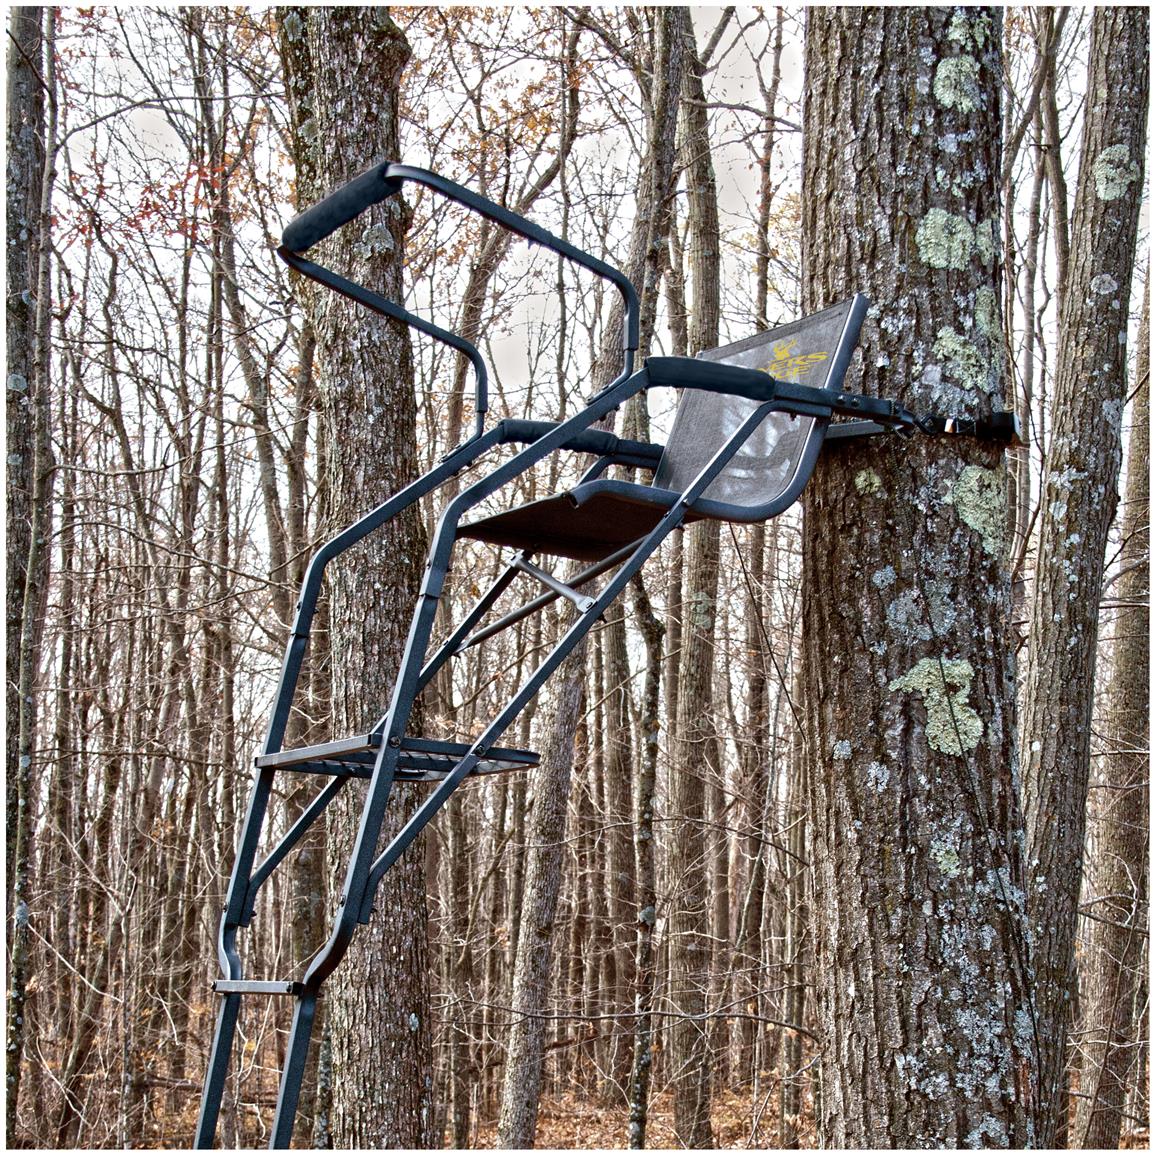 Guide Gear® 17' Deluxe 360 Degree Swivel Seat Ladder Tree Stand ...